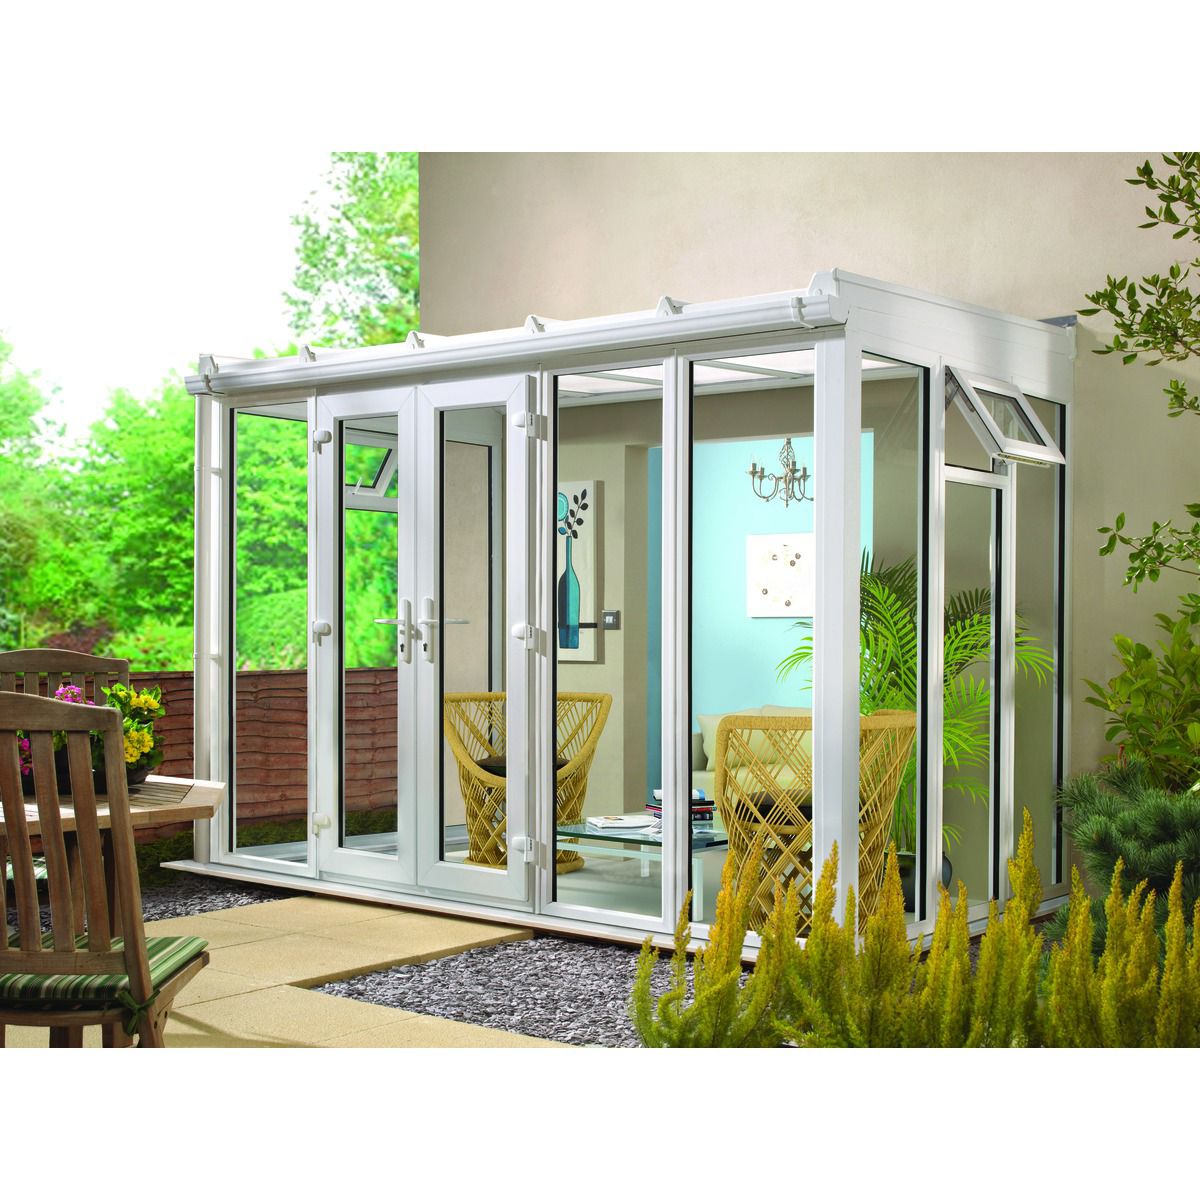 Image of Euramax Lean To Full Glass White Roof Conservatory - 8 x 8ft